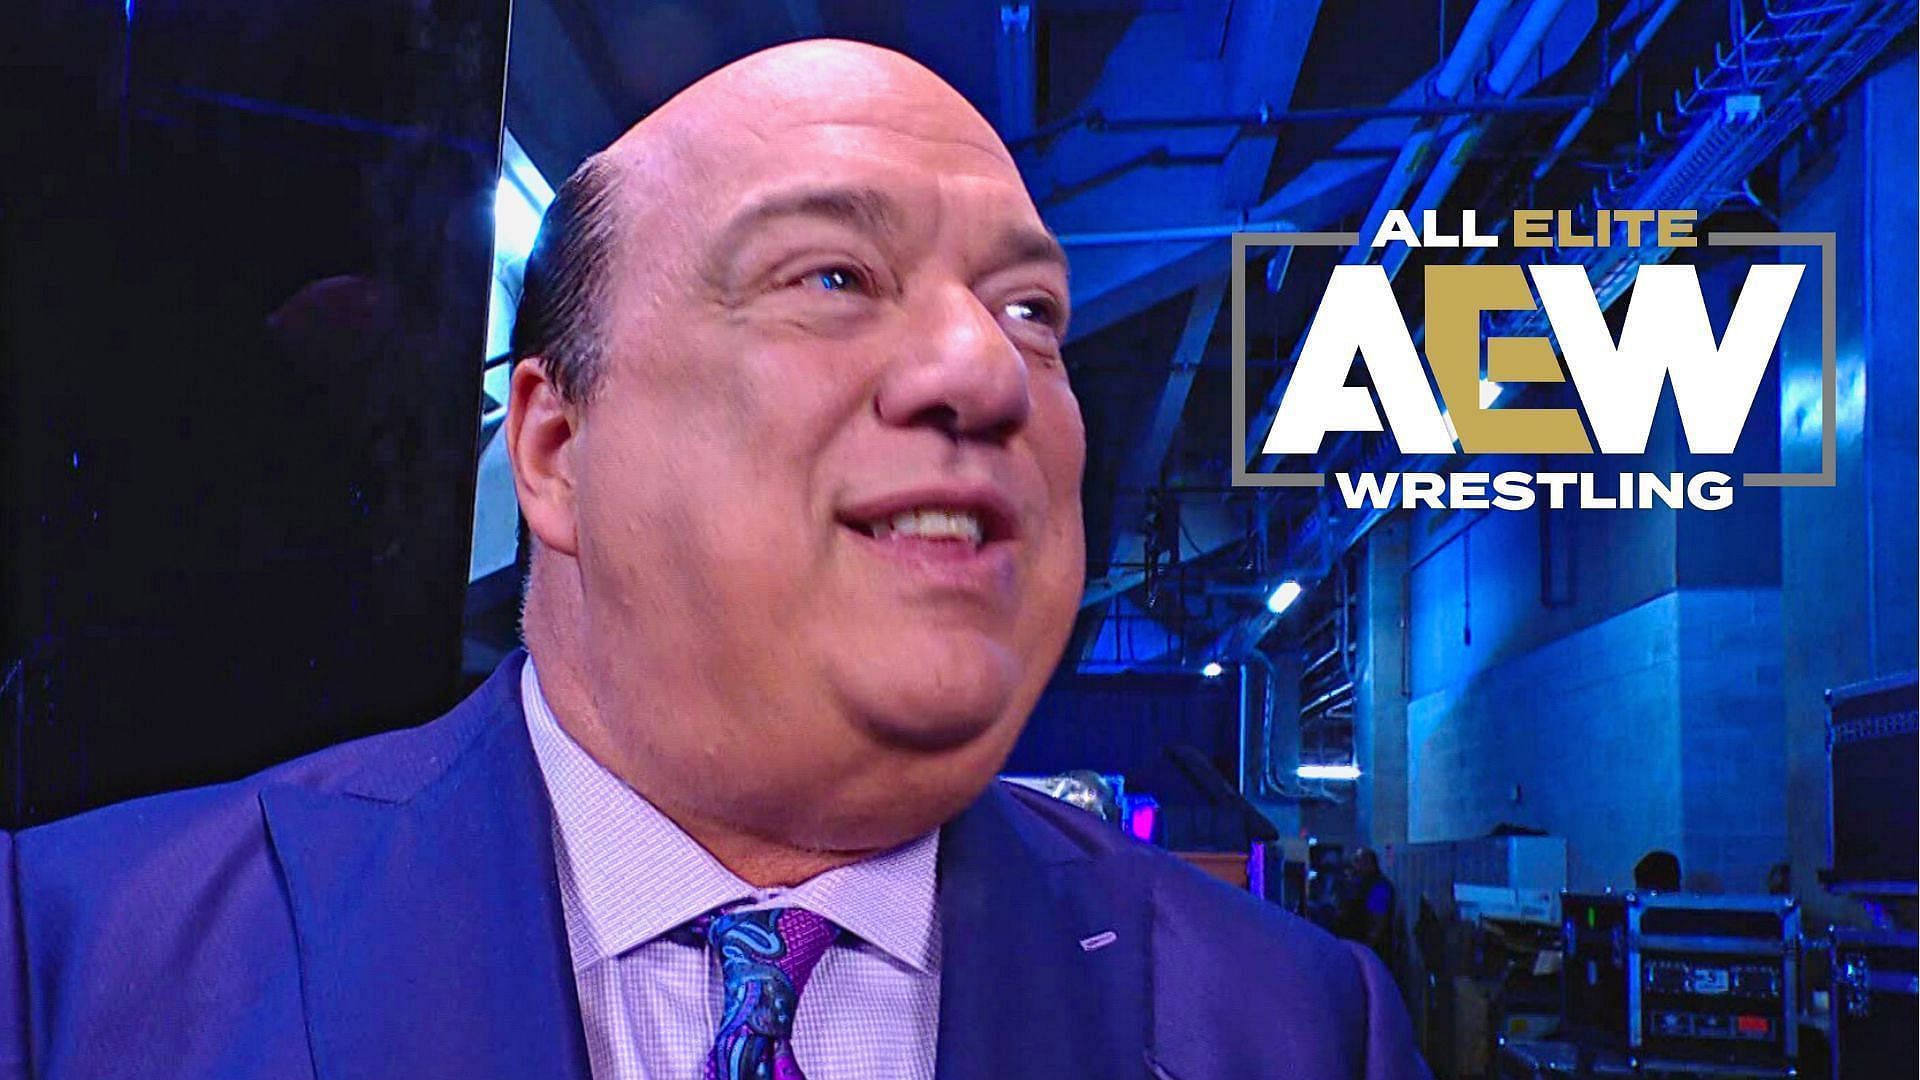 Paul Heyman serves as the Special Counsel to the Tribal Chief Roman Reigns